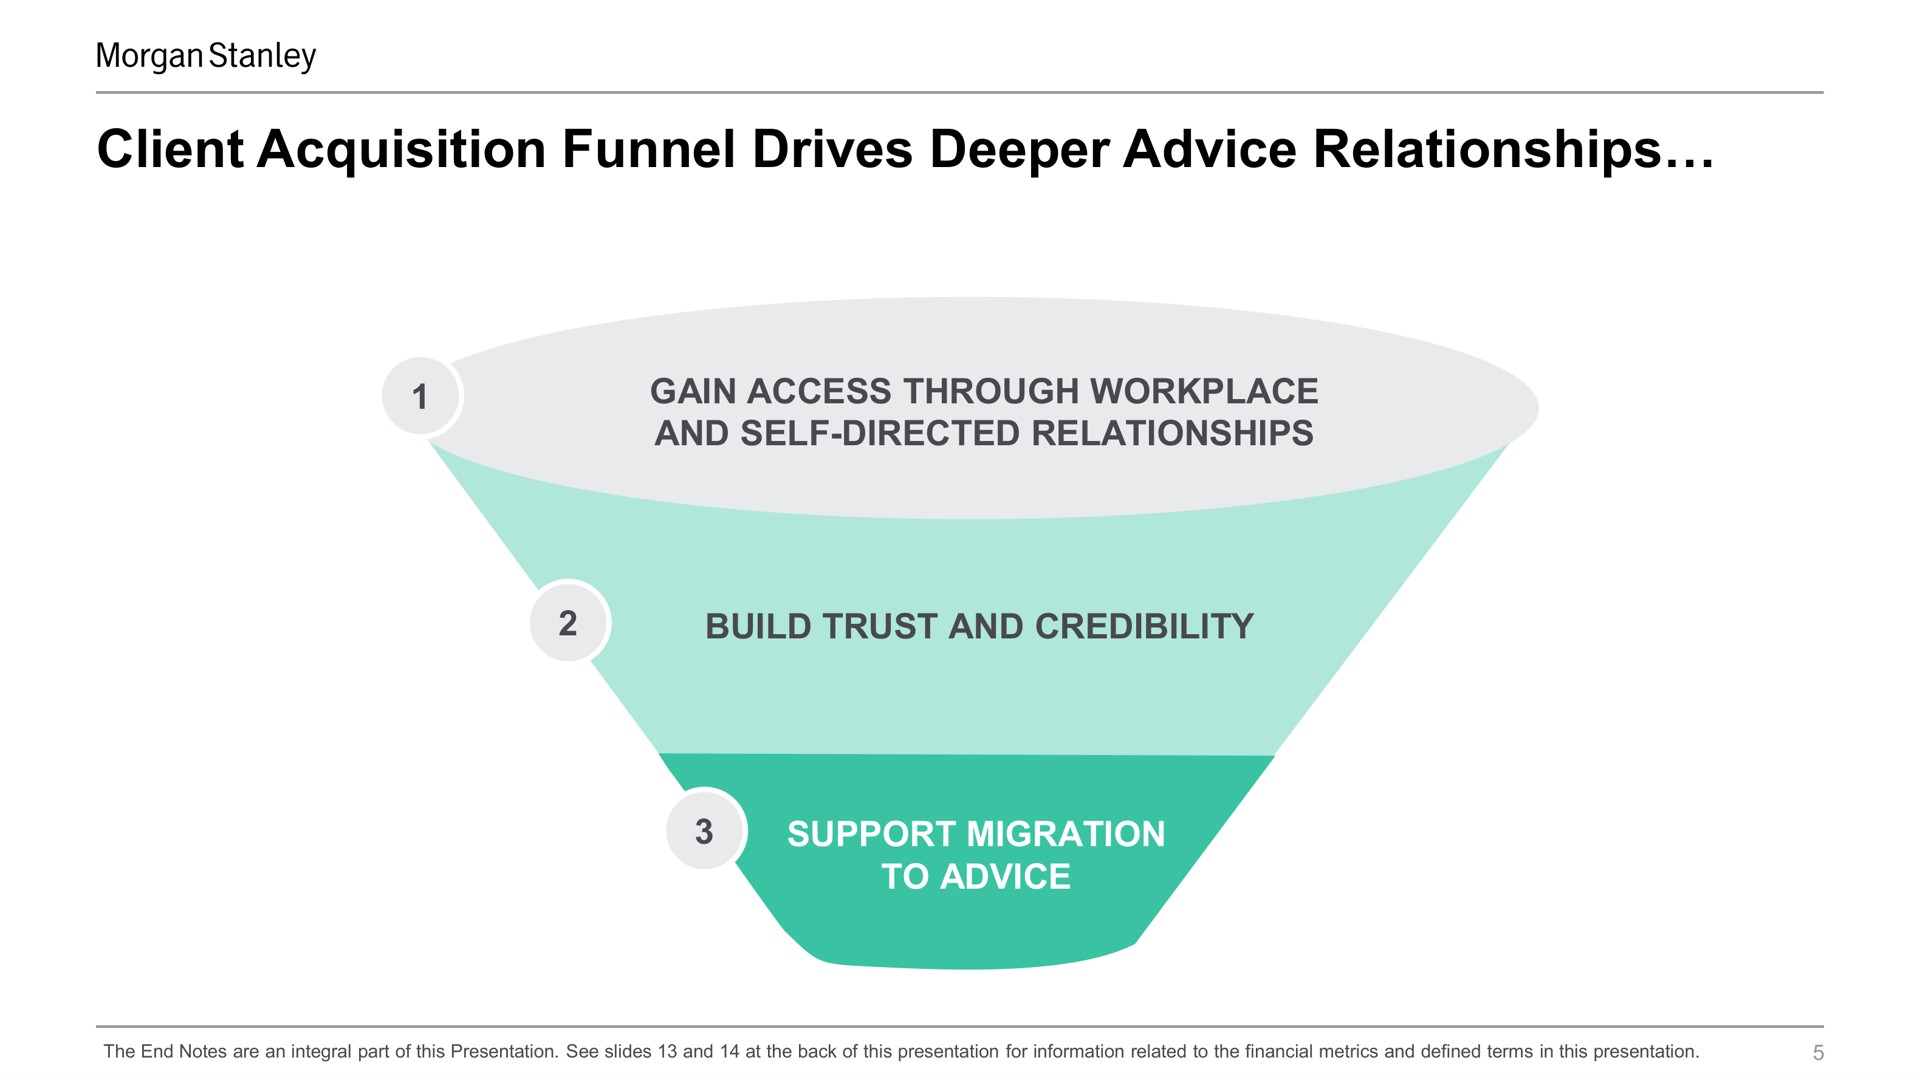 client acquisition funnel drives advice relationships | Morgan Stanley